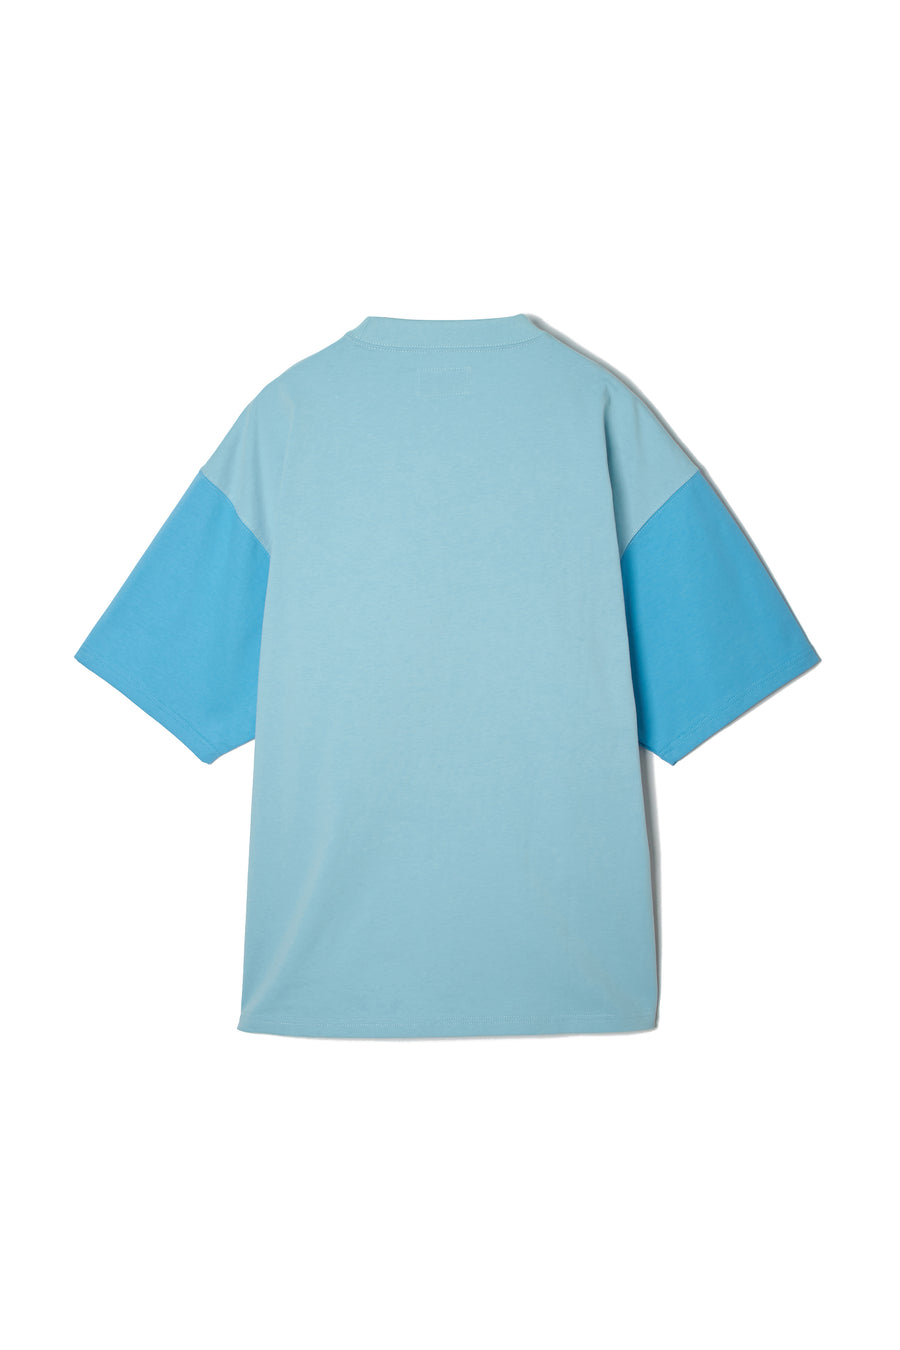 FORGET ME NOT MAYO Embroidery short Sleeve Tee - BLUE